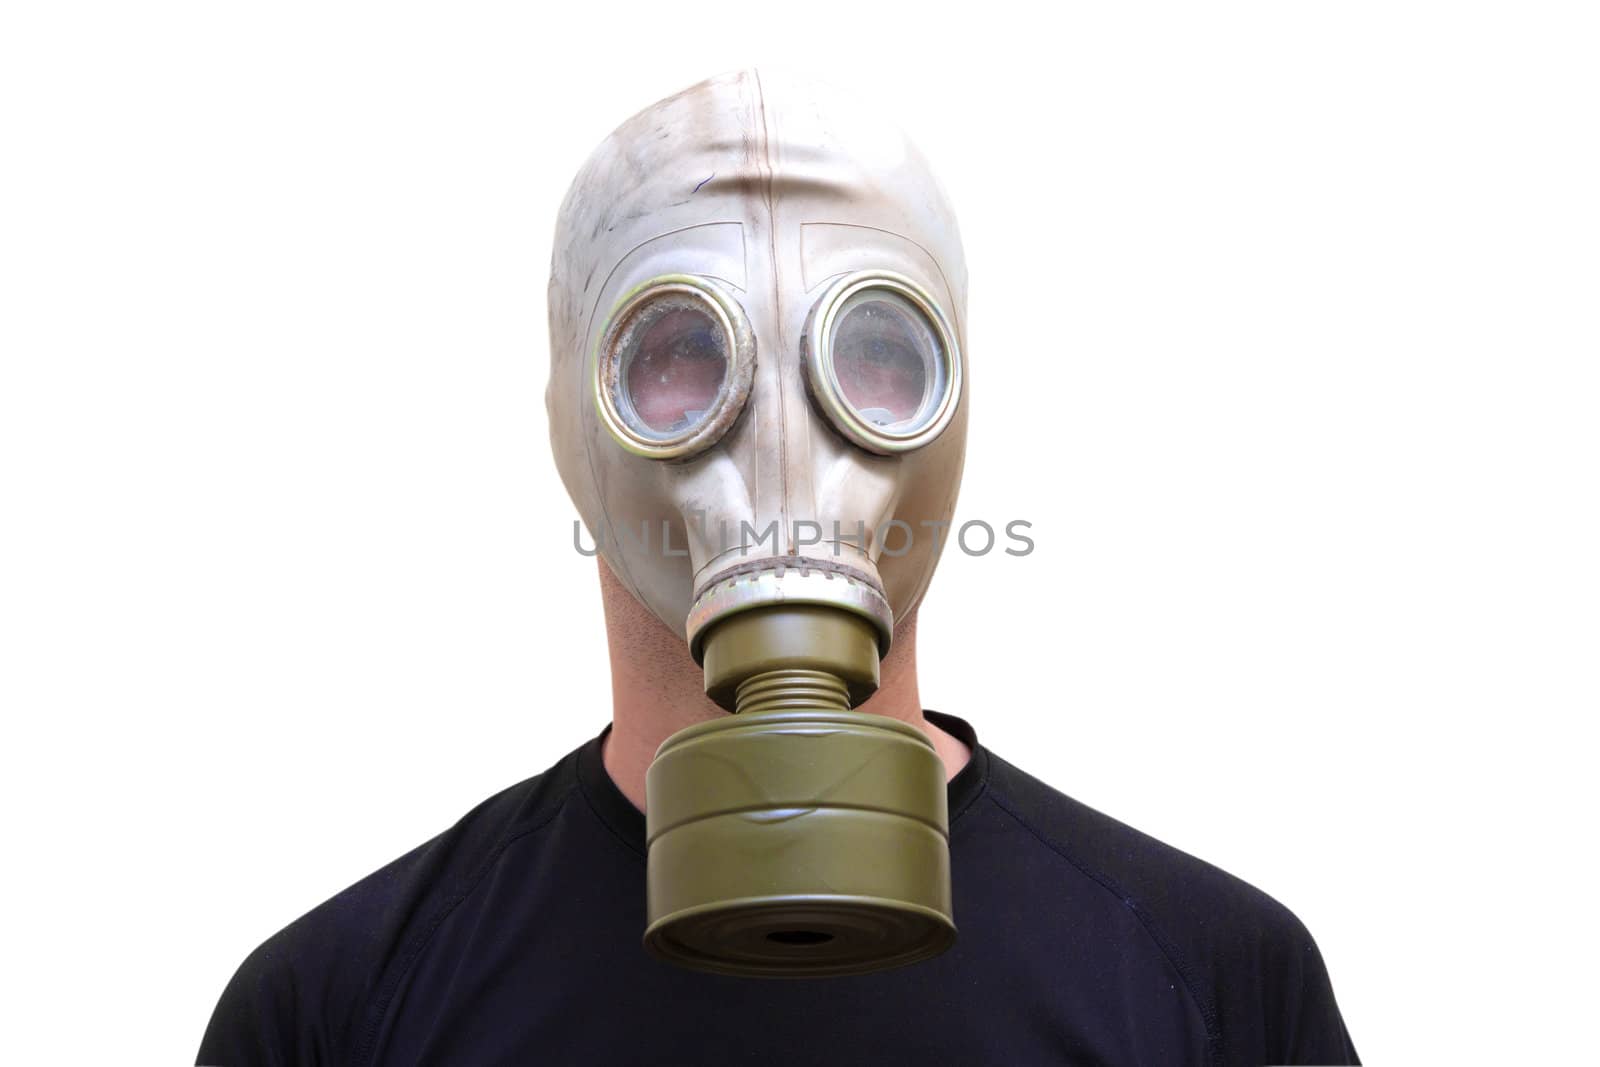 Man with old style gas mask isolated on white background, front view